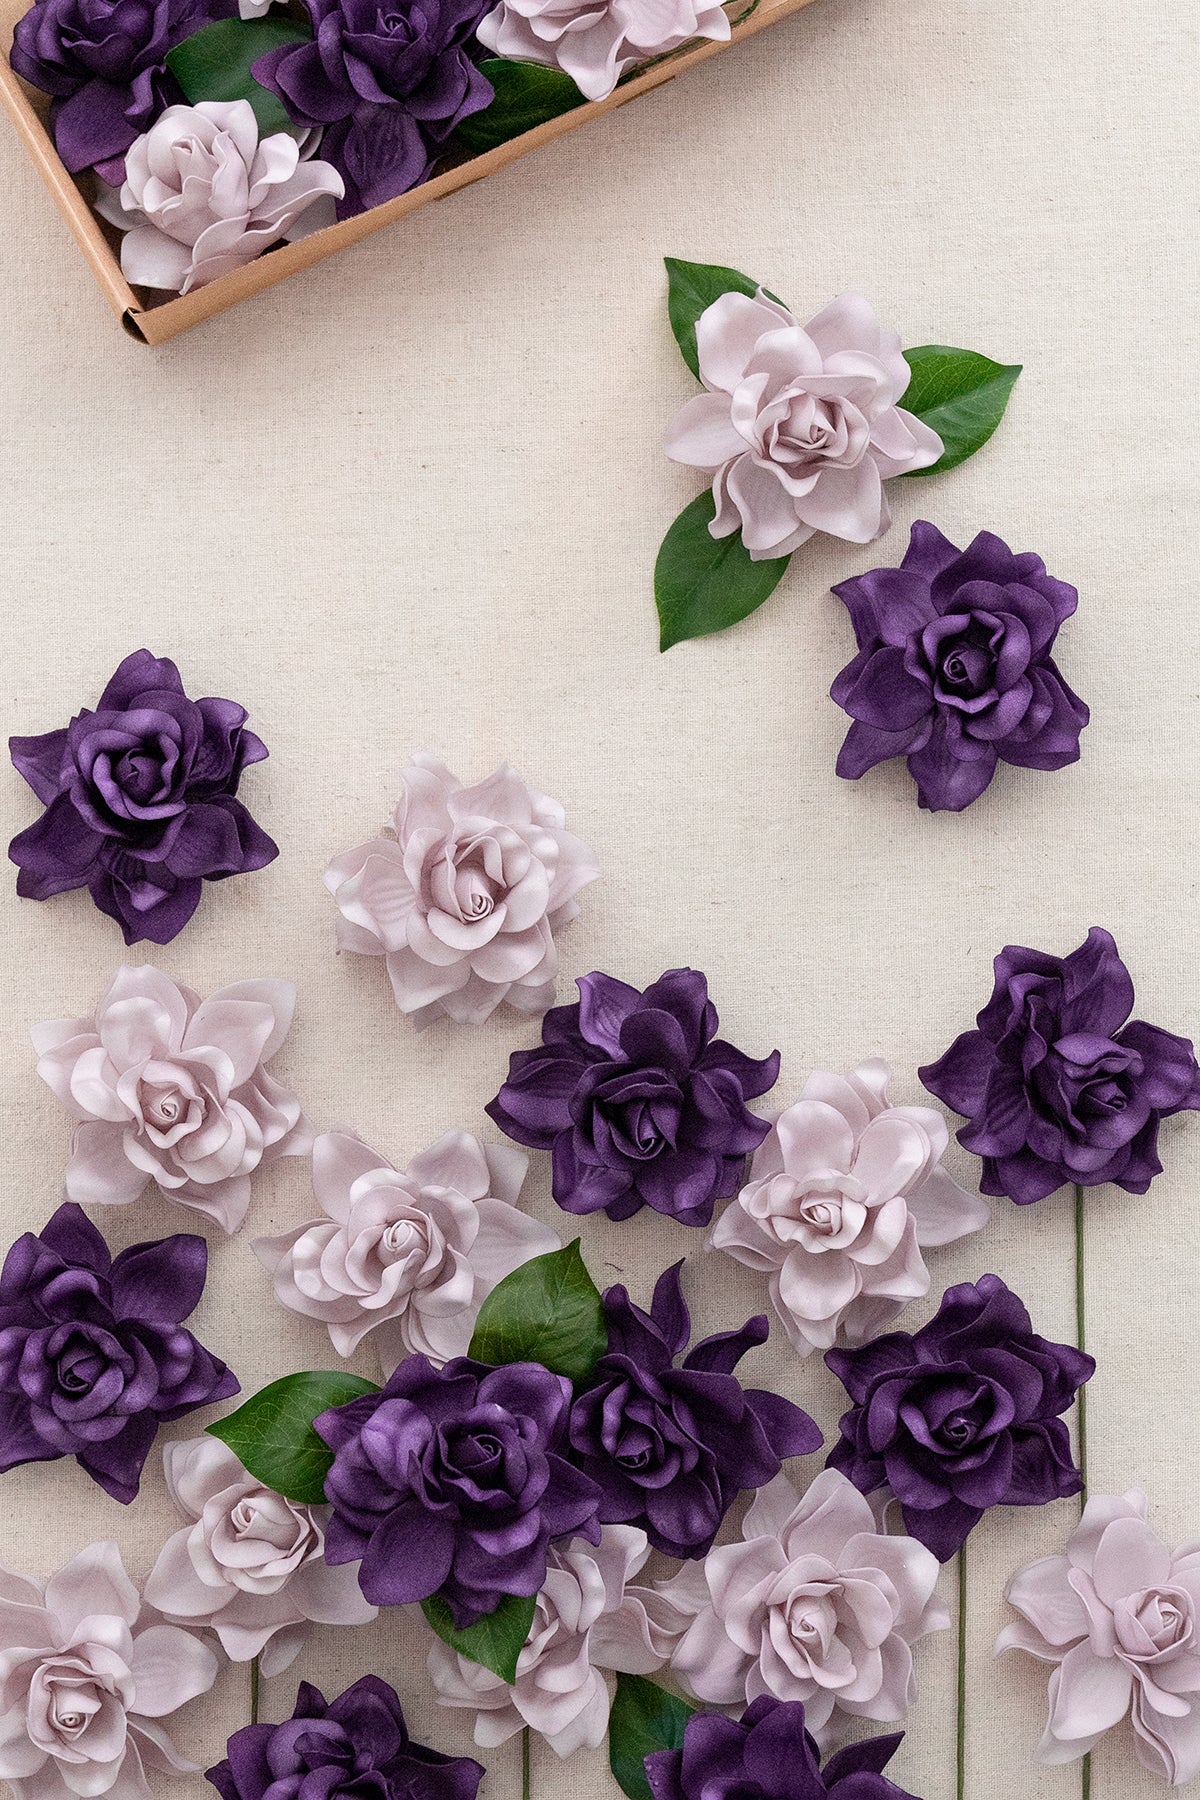 DIY Supporting Flowers in Classic Purple